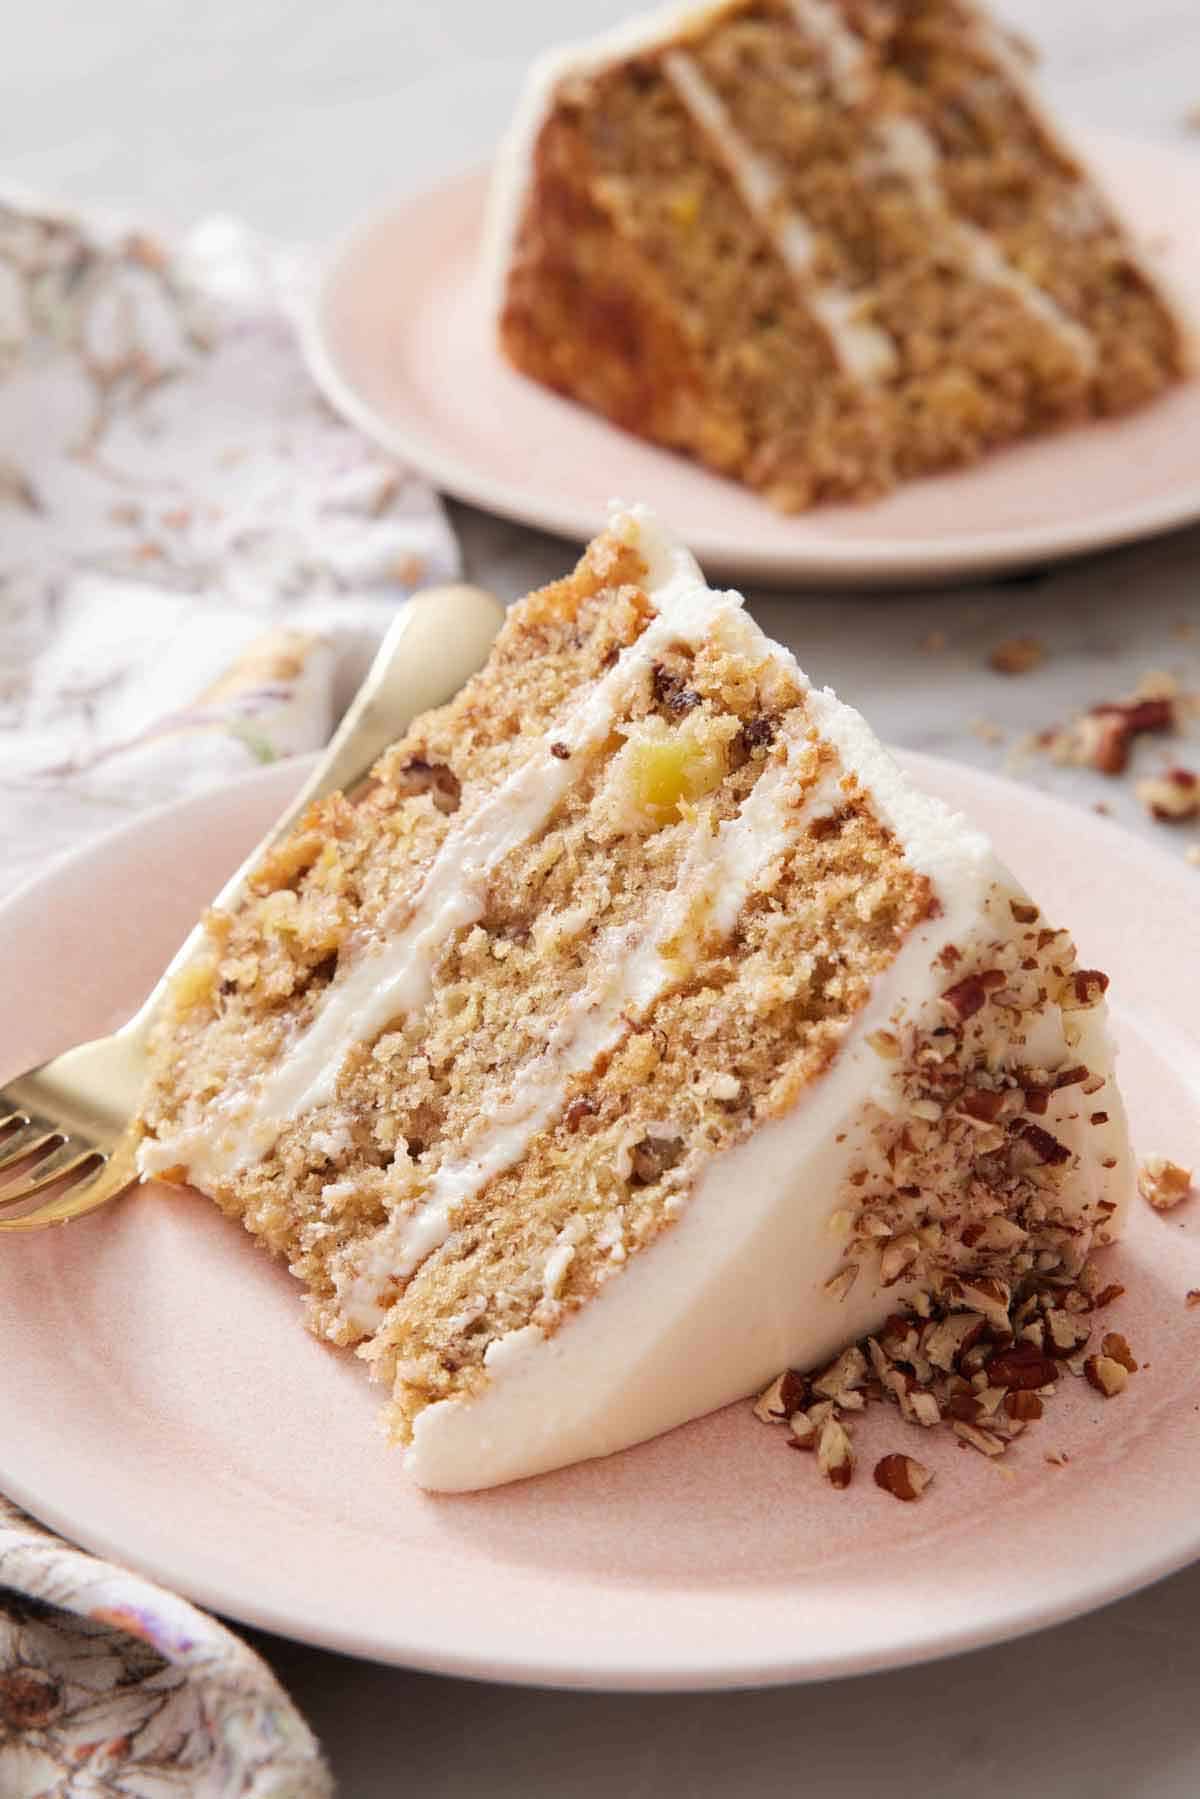 A slice of hummingbird cake on a plate showing the three layers. A second slice in the background.